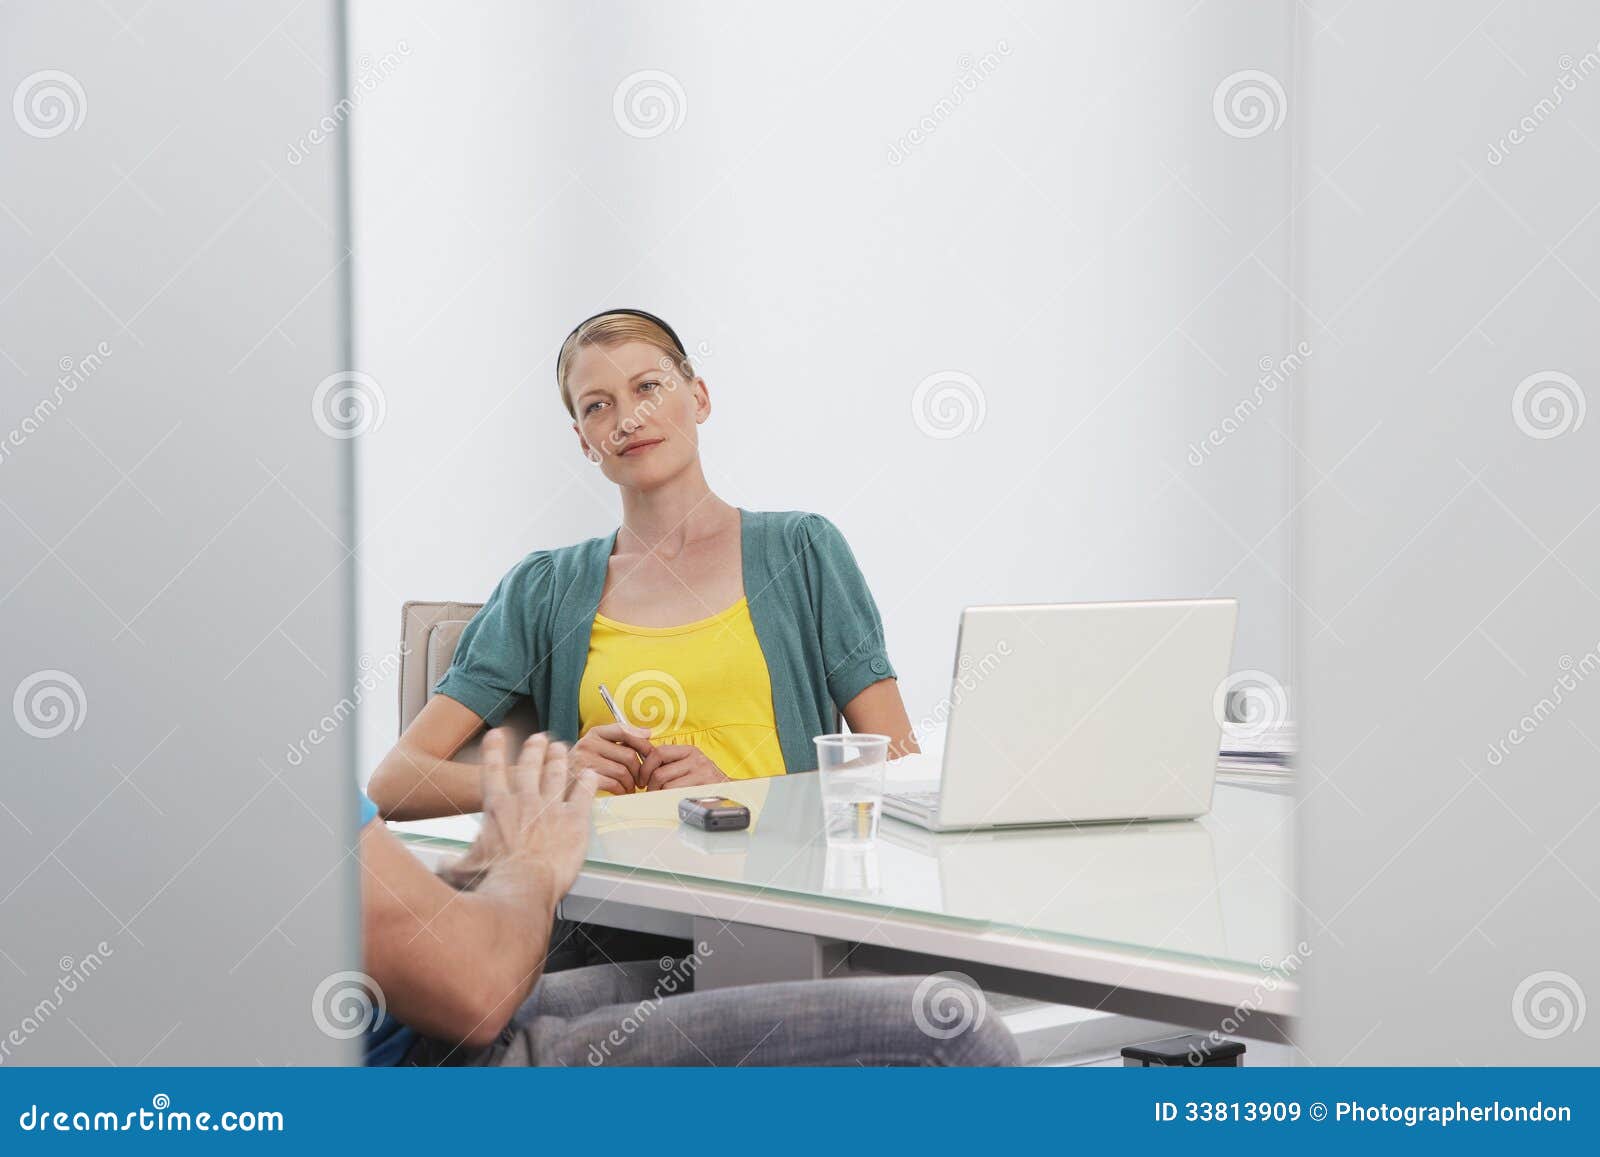 woman talking to cropped colleague in office